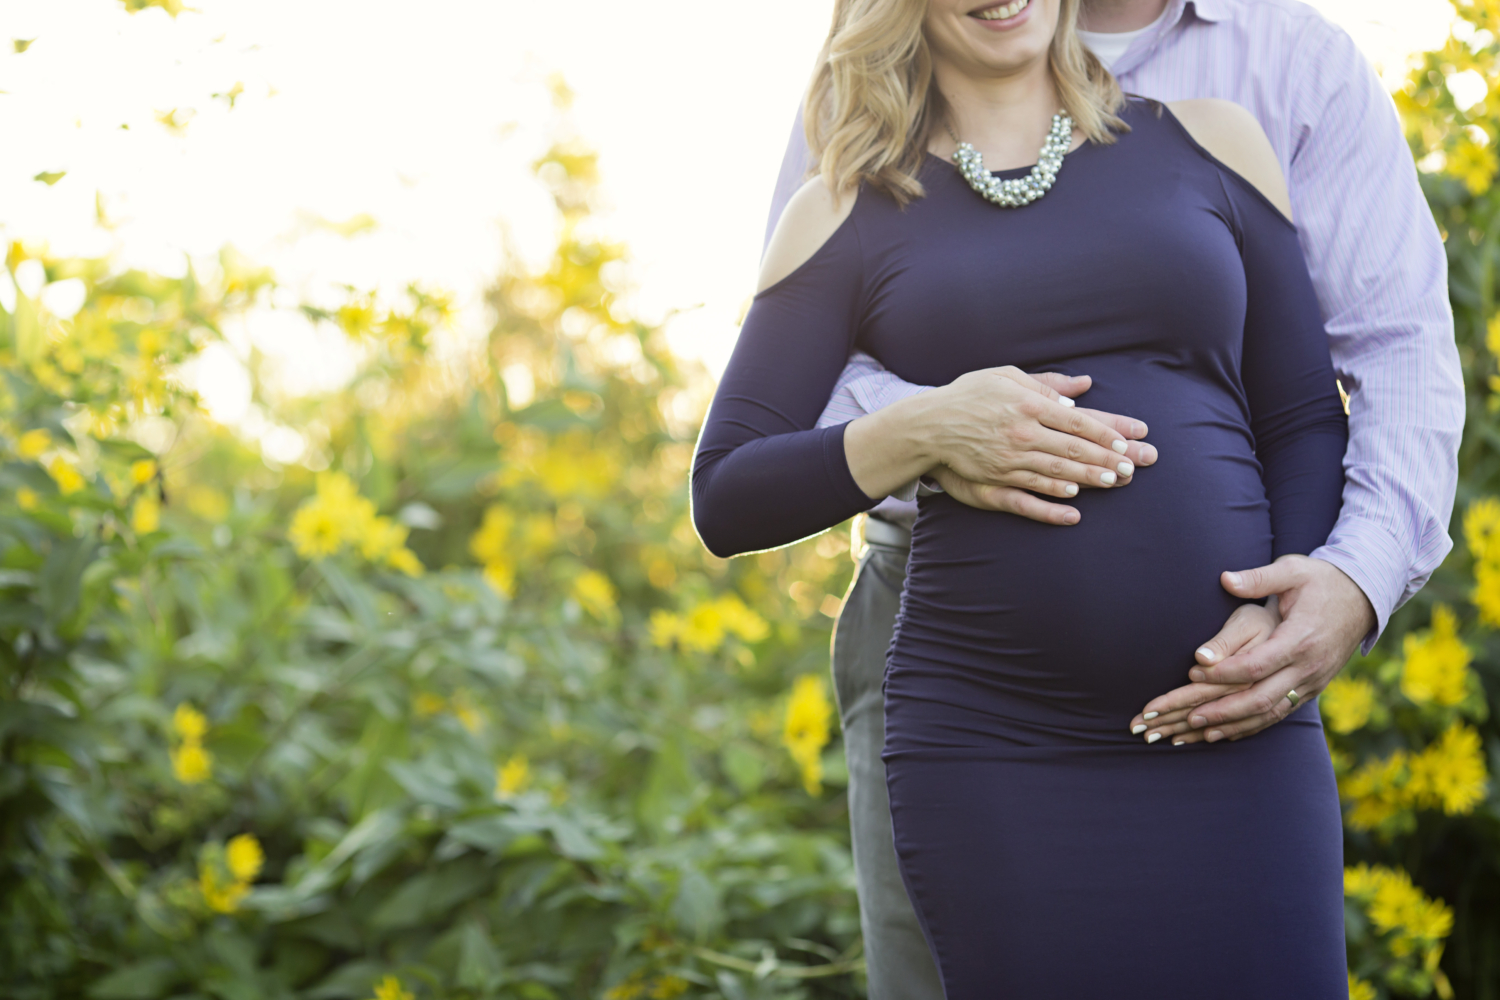 West-Hartford-CT-Maternity-Photography-51